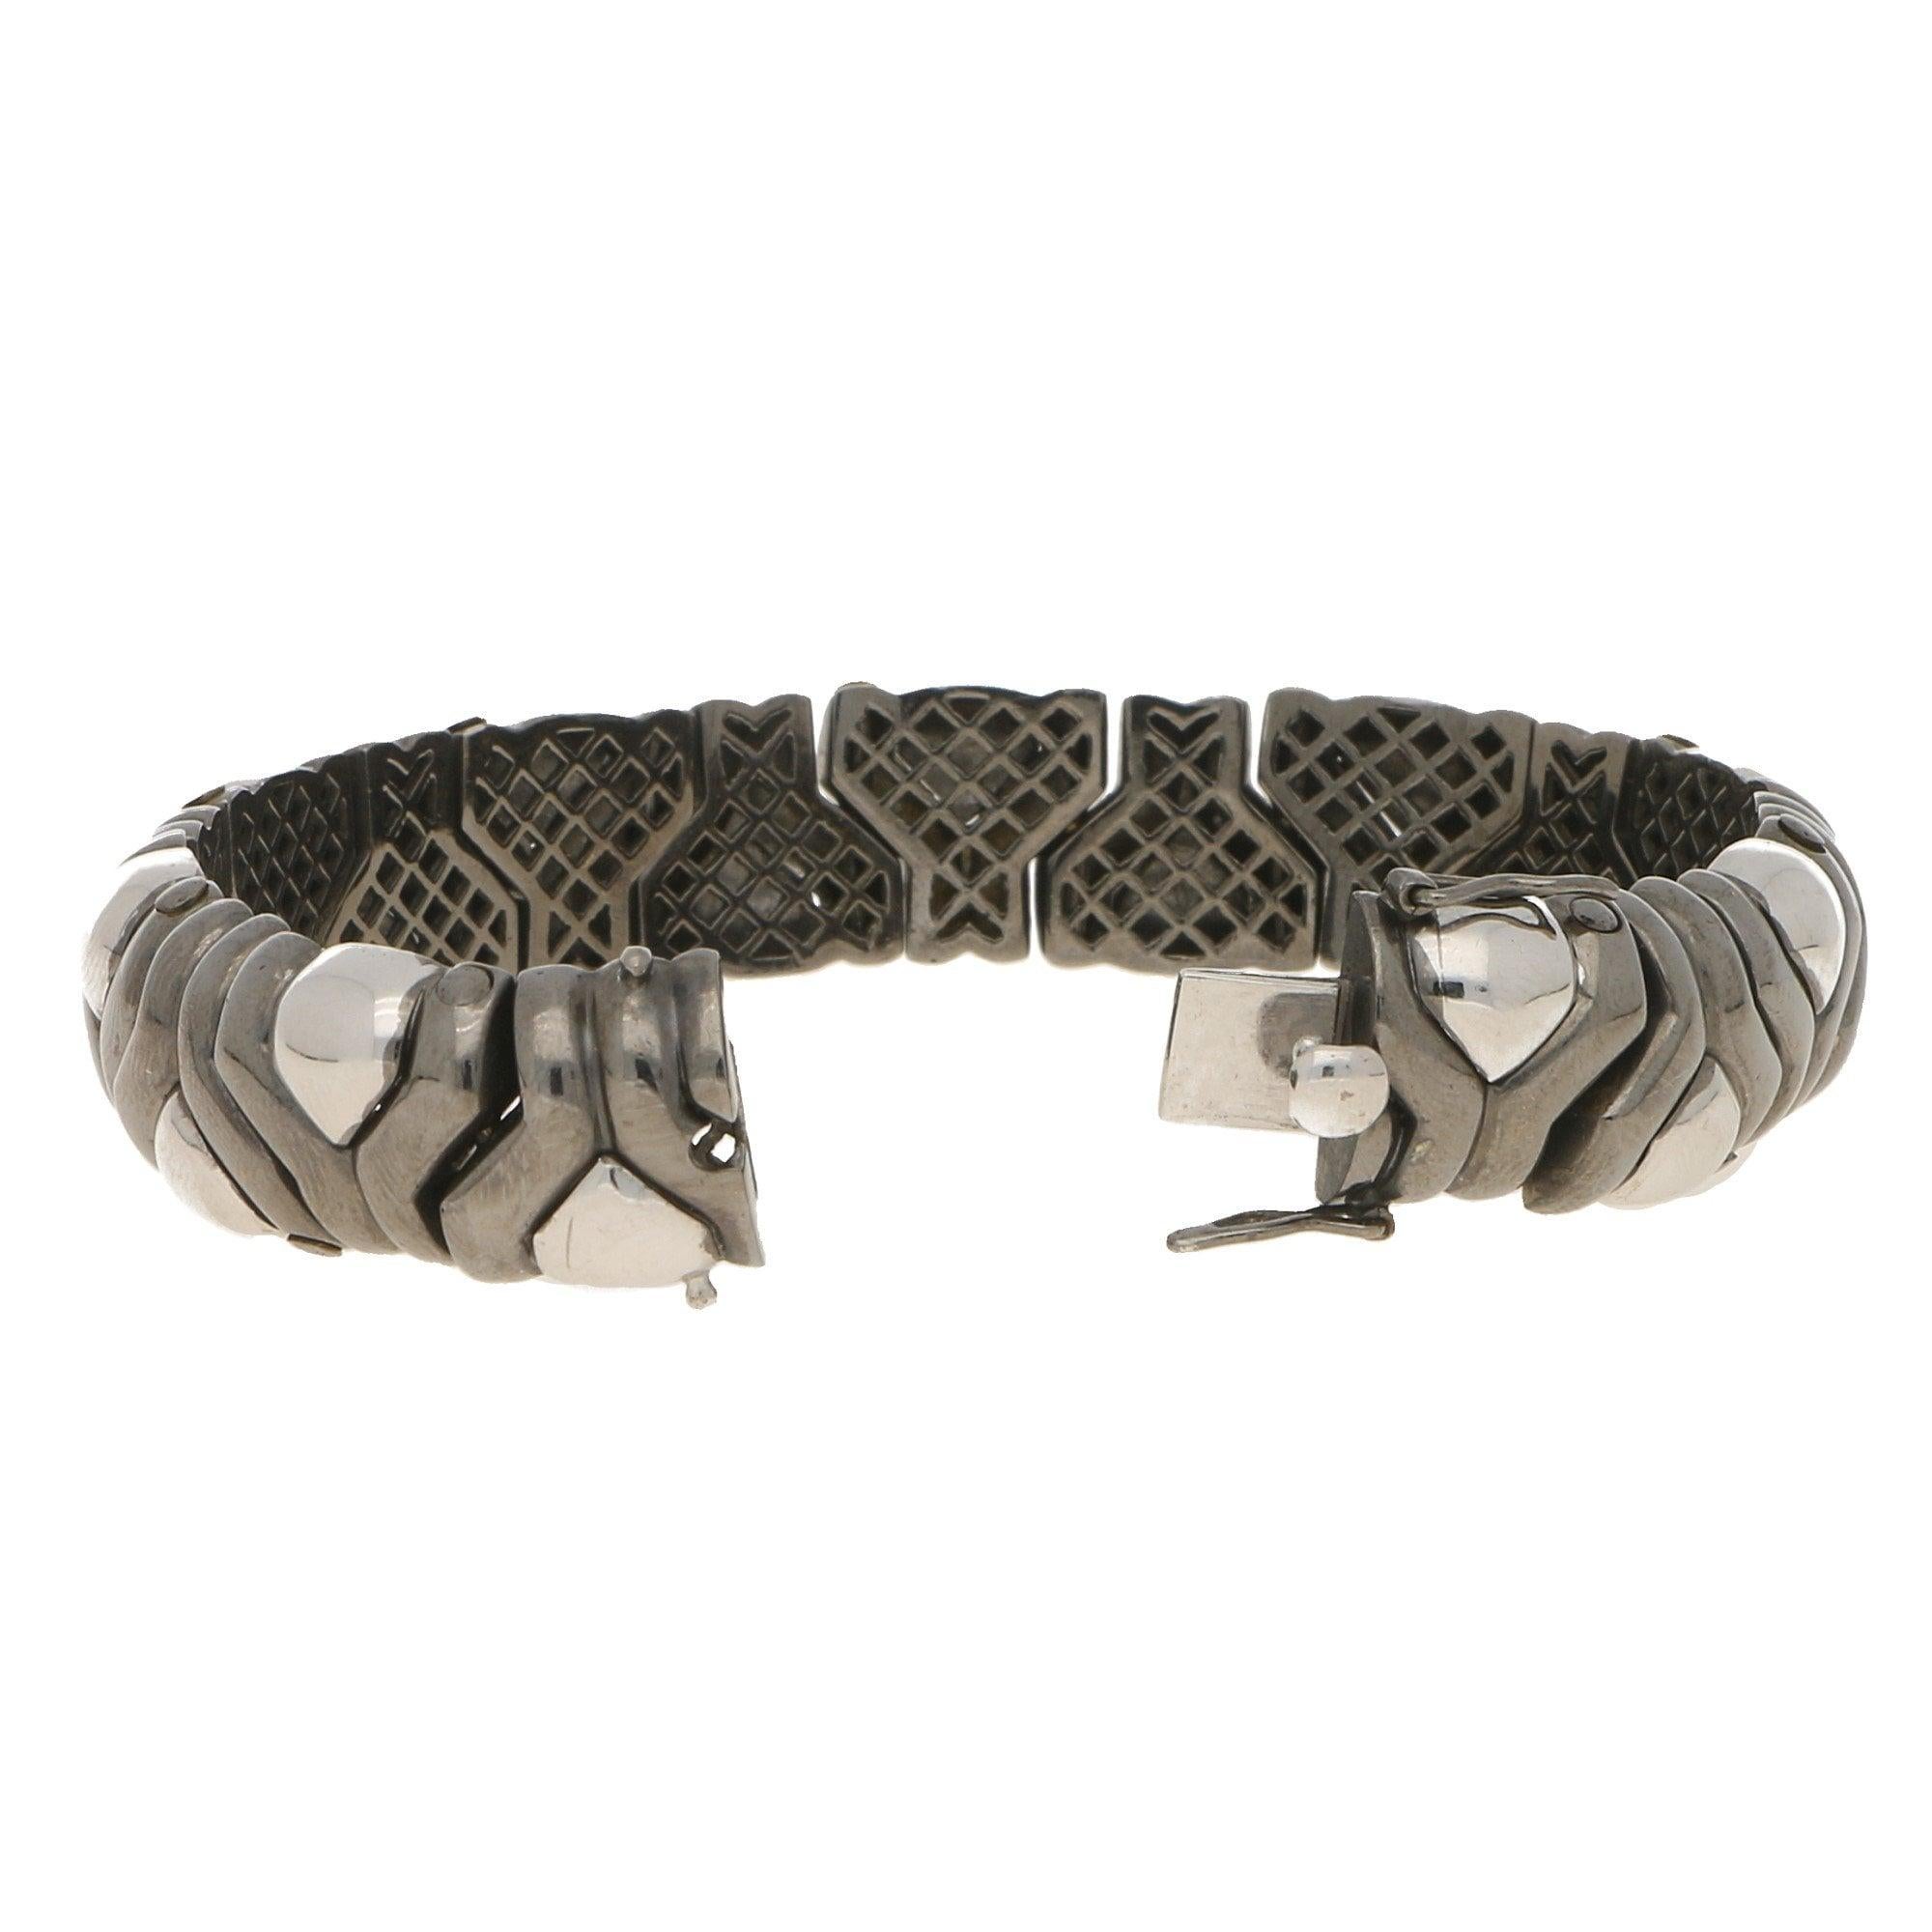 Vintage Italian Aztec Style Mosaic Bracelet in Black and White Gold For Sale 1